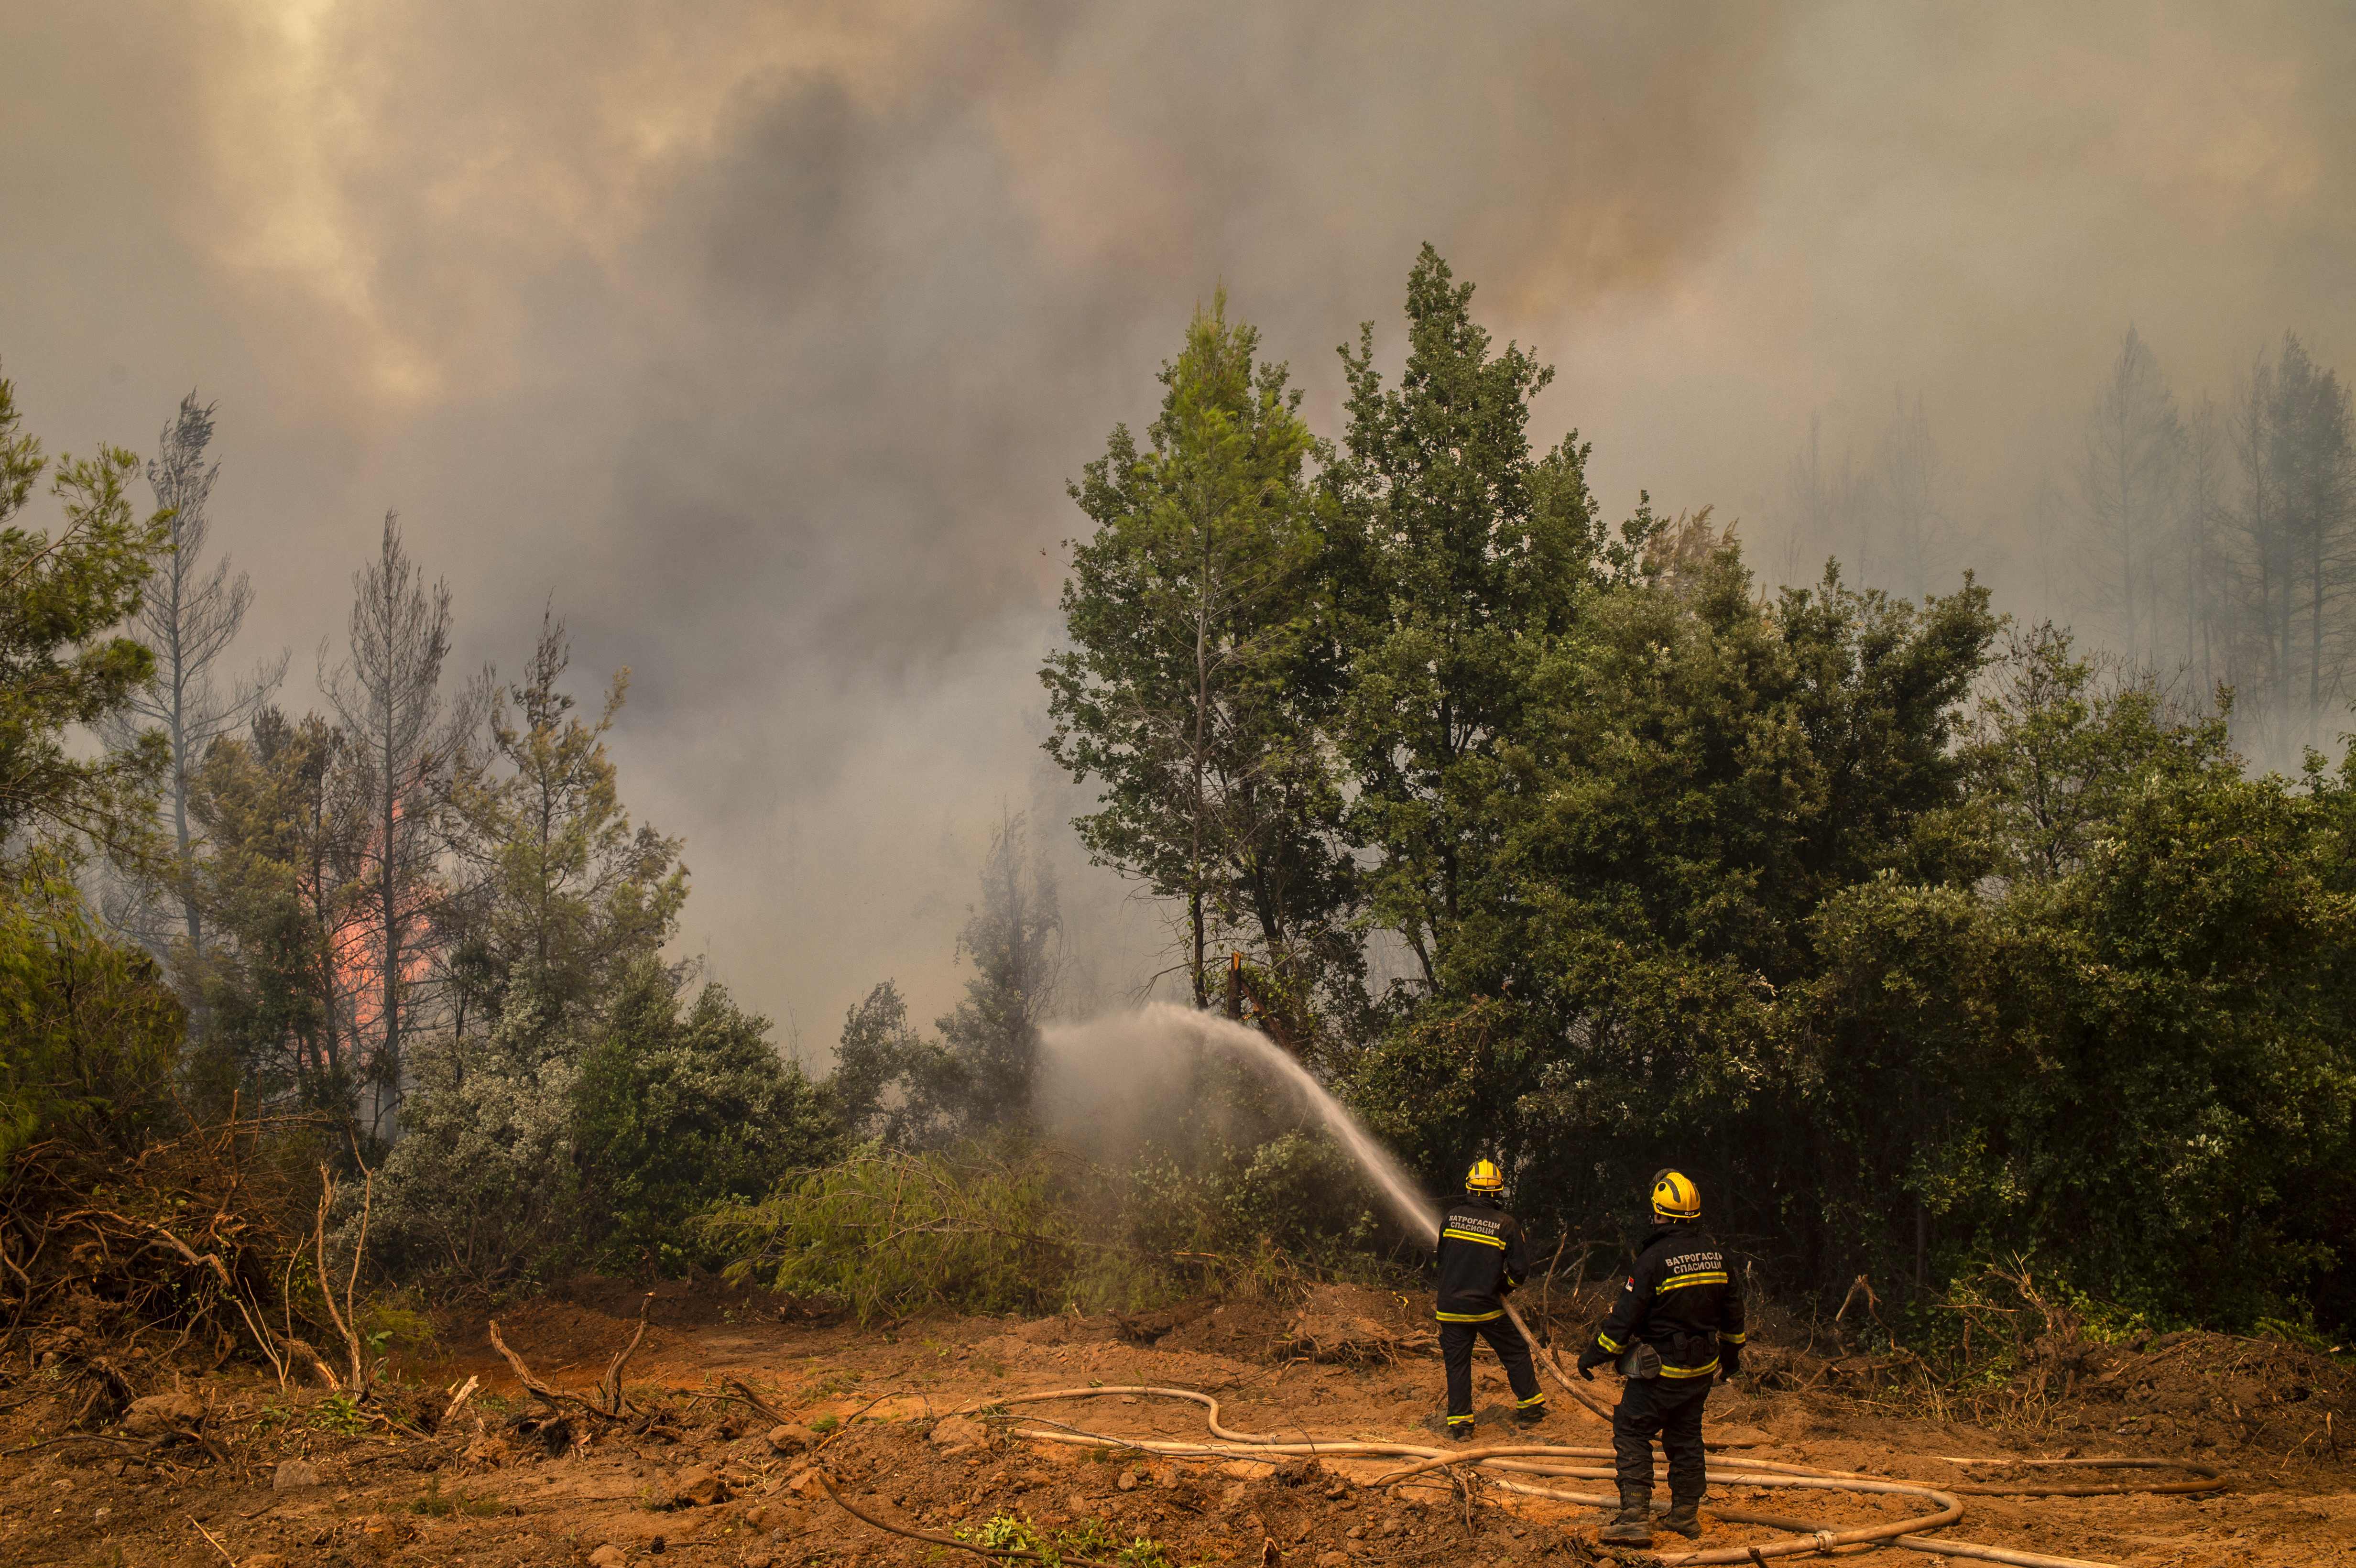 Firefighters from Serbia use a water hose to extinguish a forest fire near the village of Avgaria on Evia